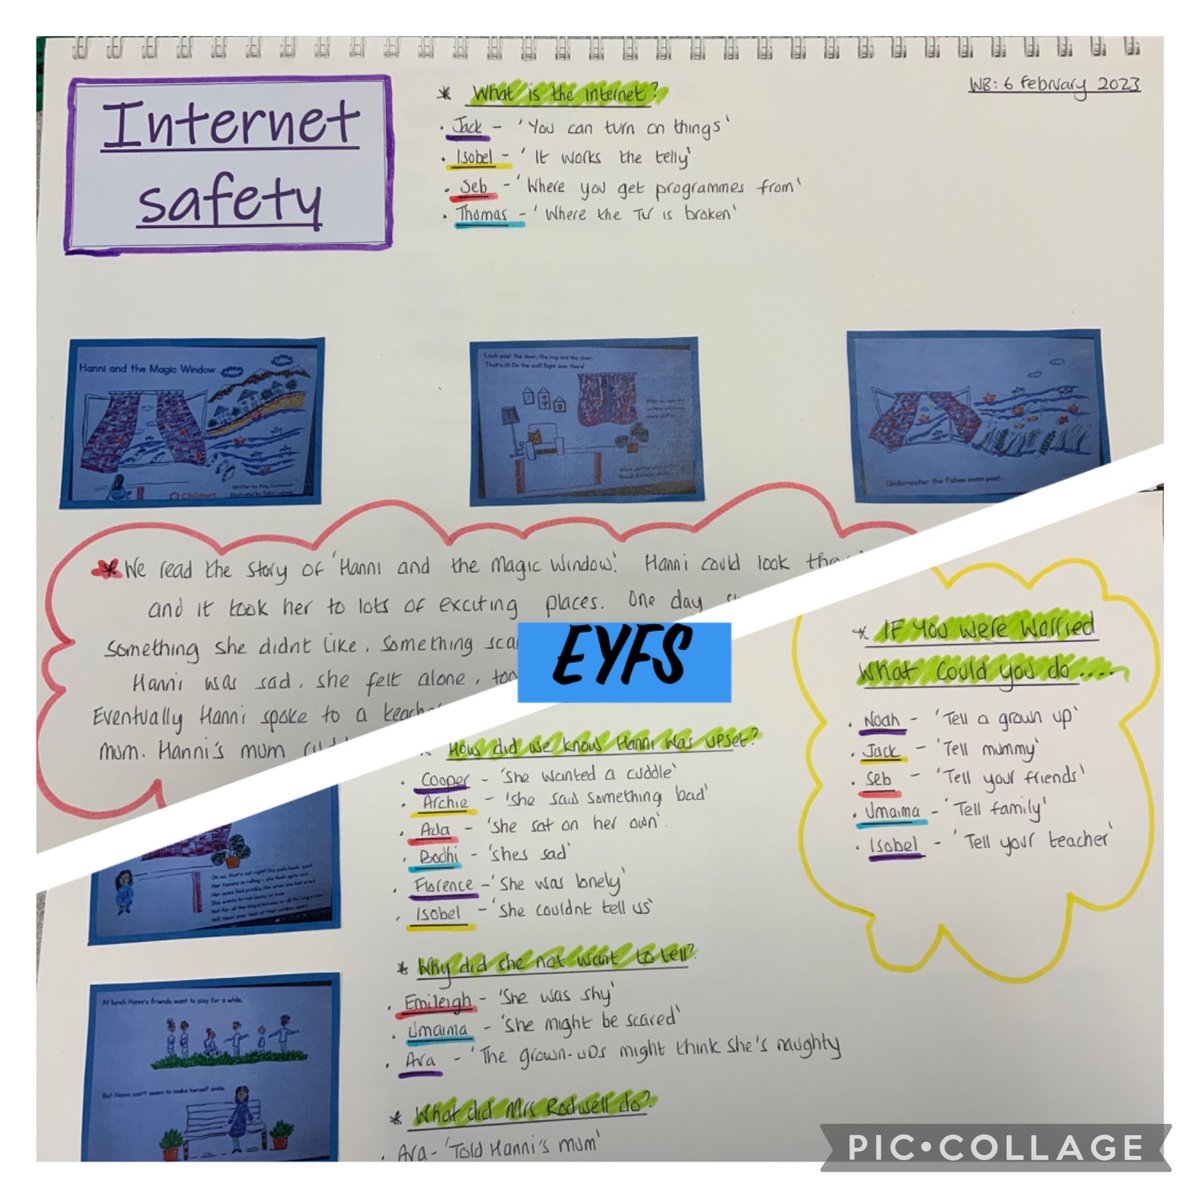 Safer internet day brought so much learning to Parochial, last week!

#dignityandrespect
#communityandlivingwelltogether